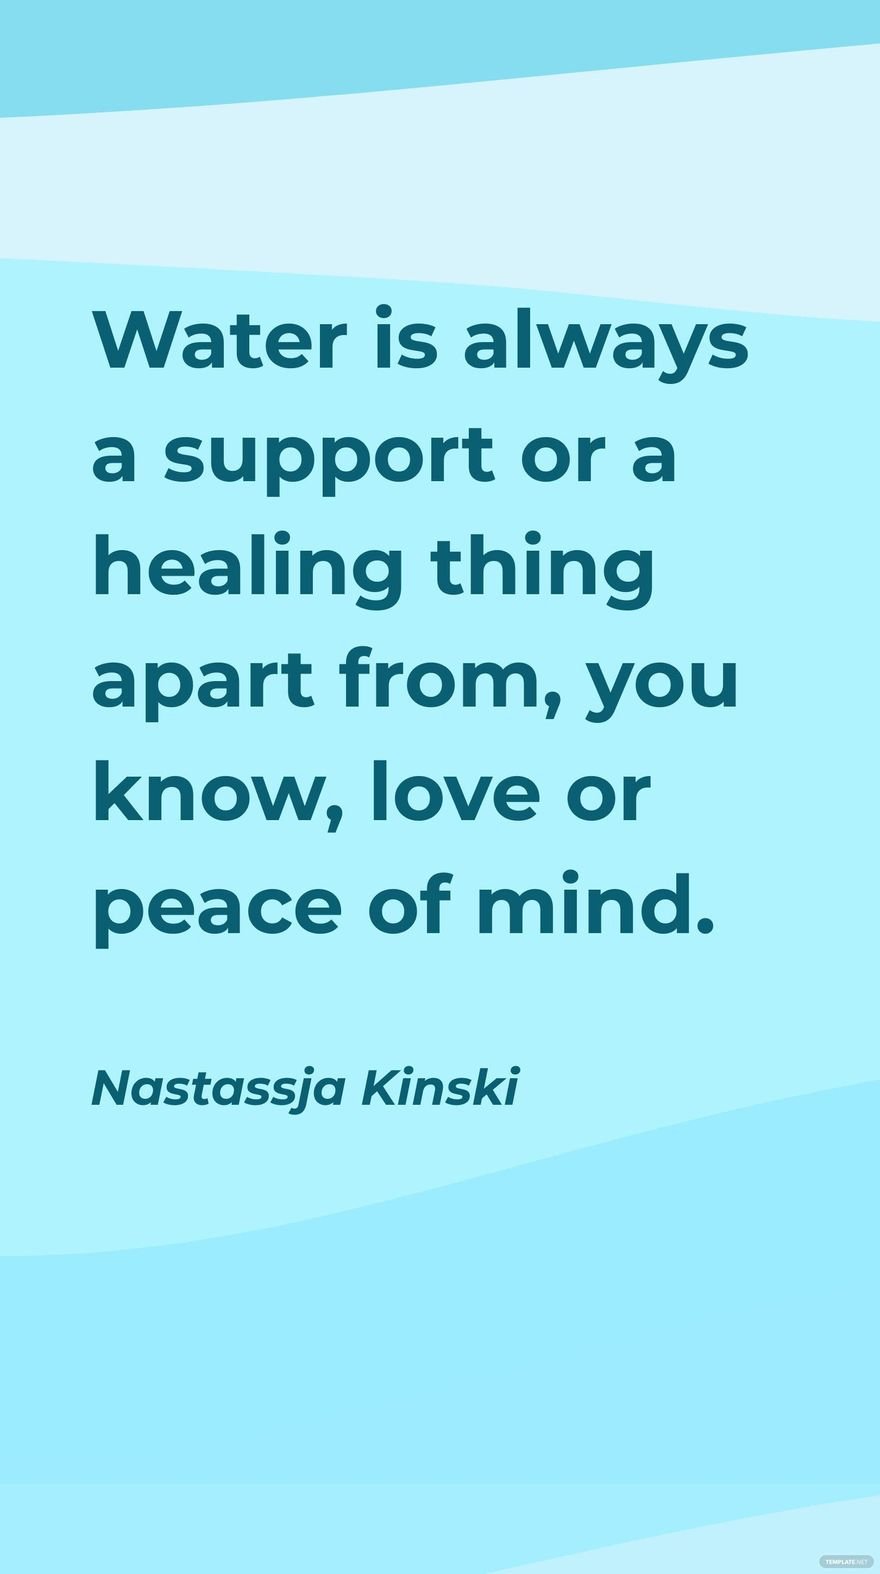 Nastassja Kinski - Water is always a support or a healing thing apart from, you know, love or peace of mind.